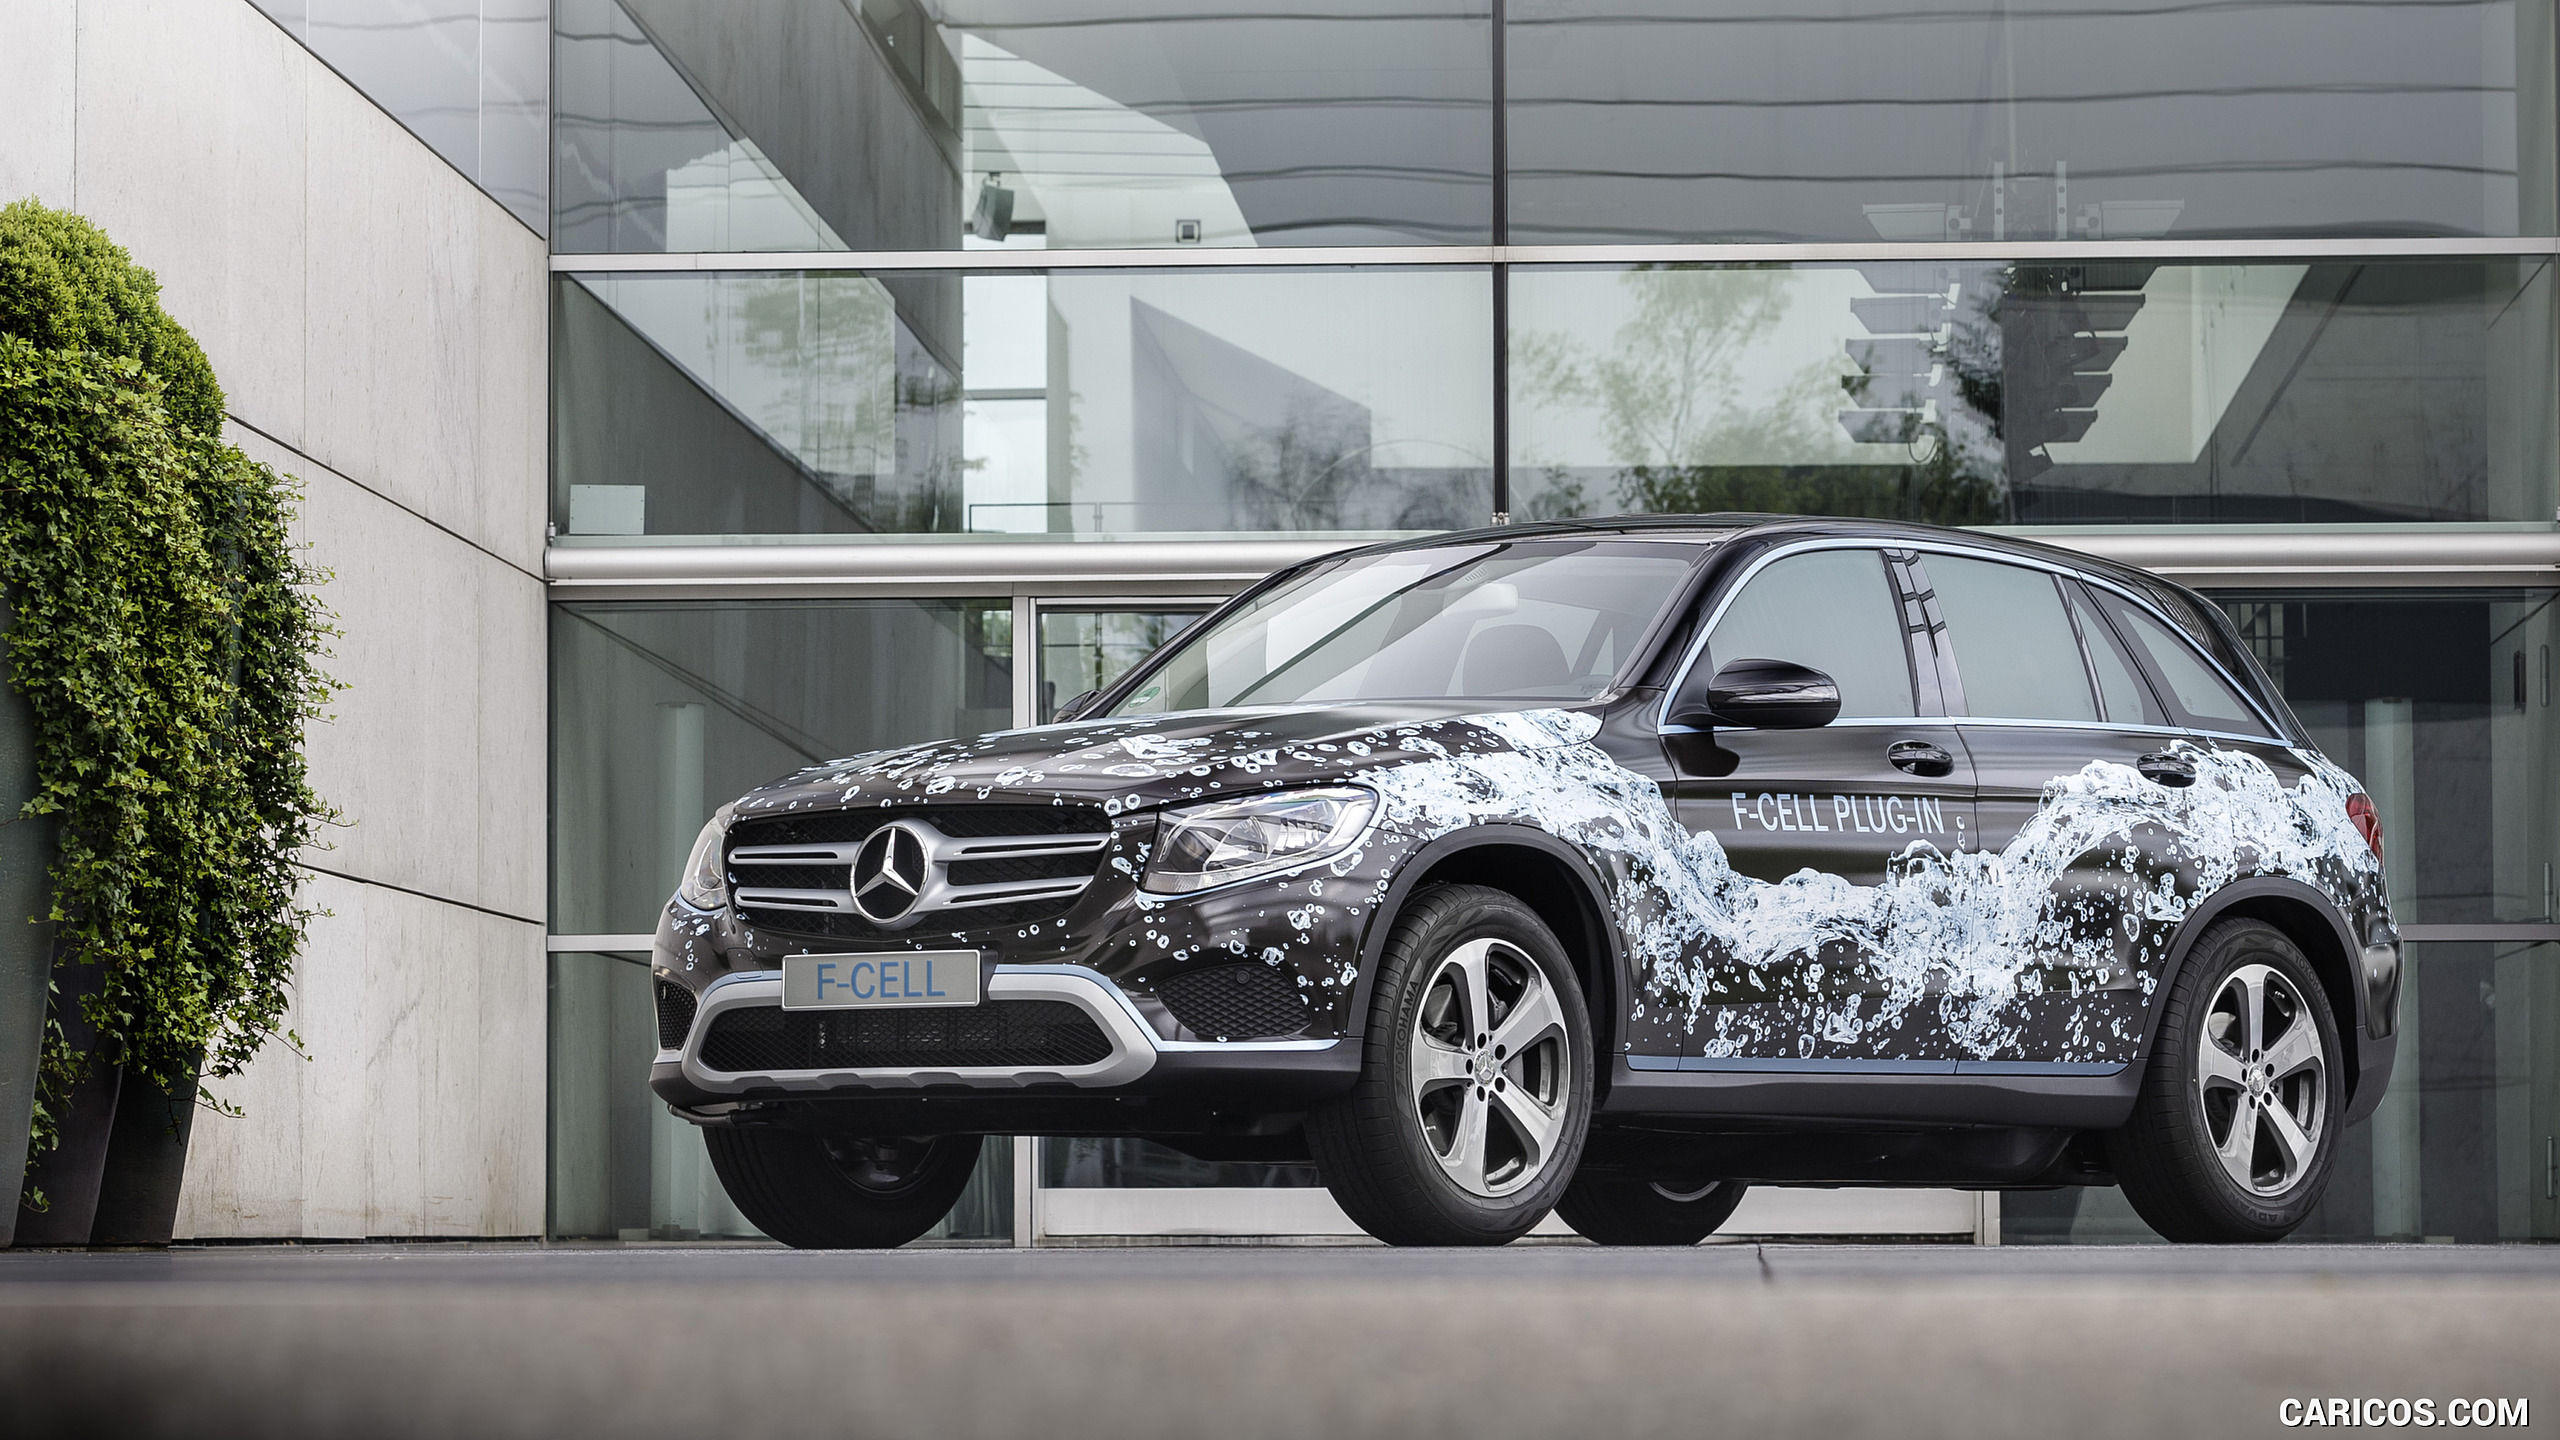 2016 Mercedes-Benz GLC F-Cell Plug-In Concept - Front Three-Quarter, #6 of 20